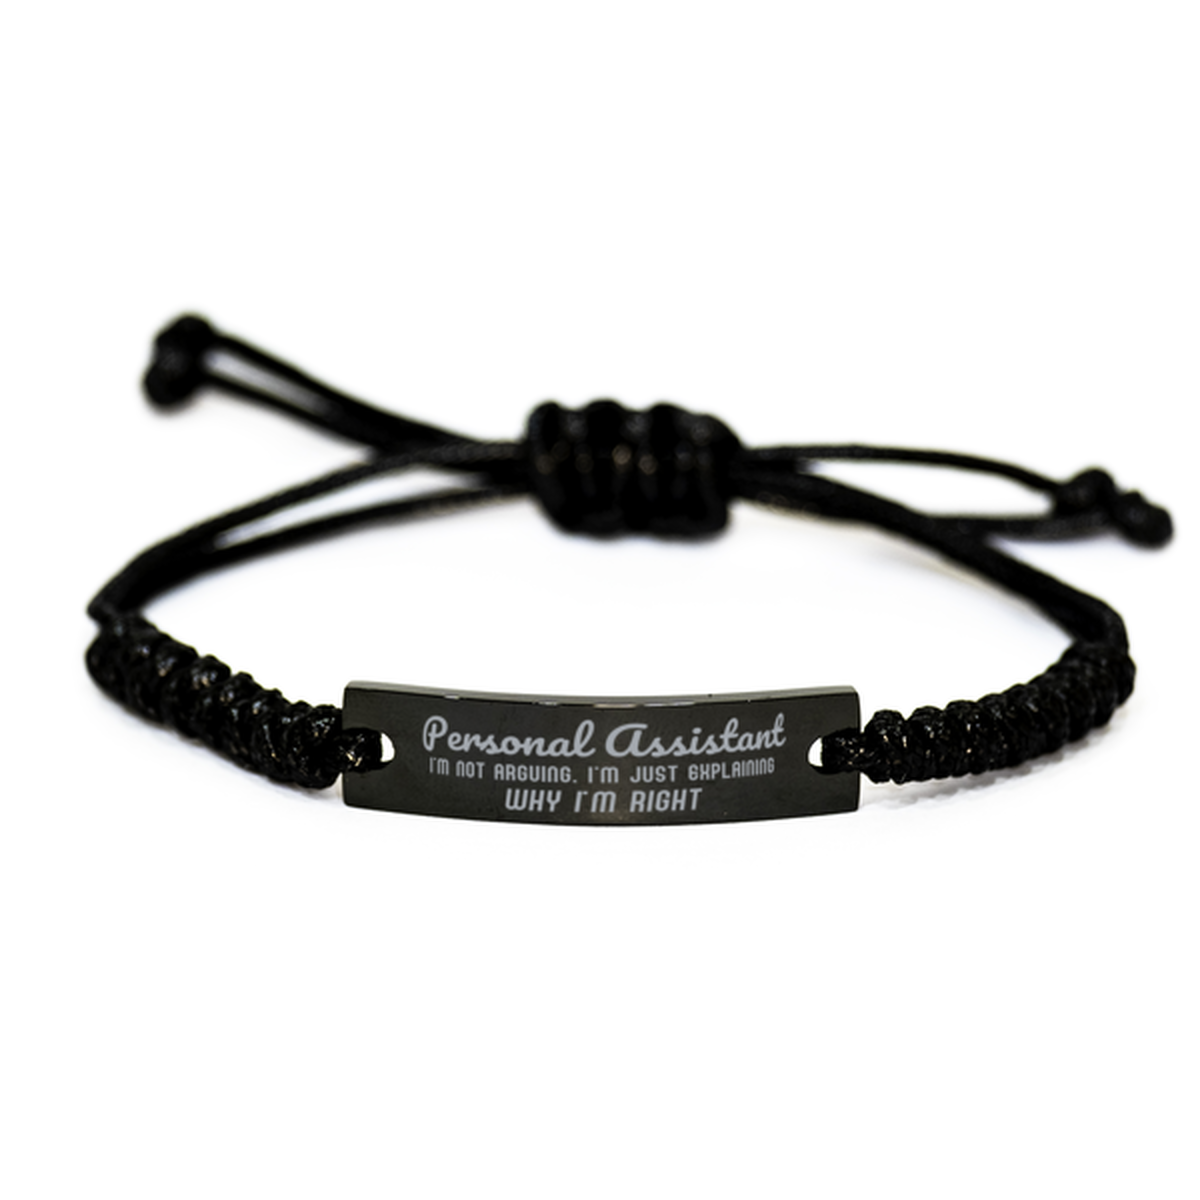 Personal Assistant I'm not Arguing. I'm Just Explaining Why I'm RIGHT Black Rope Bracelet, Funny Saying Quote Personal Assistant Gifts For Personal Assistant Graduation Birthday Christmas Gifts for Men Women Coworker